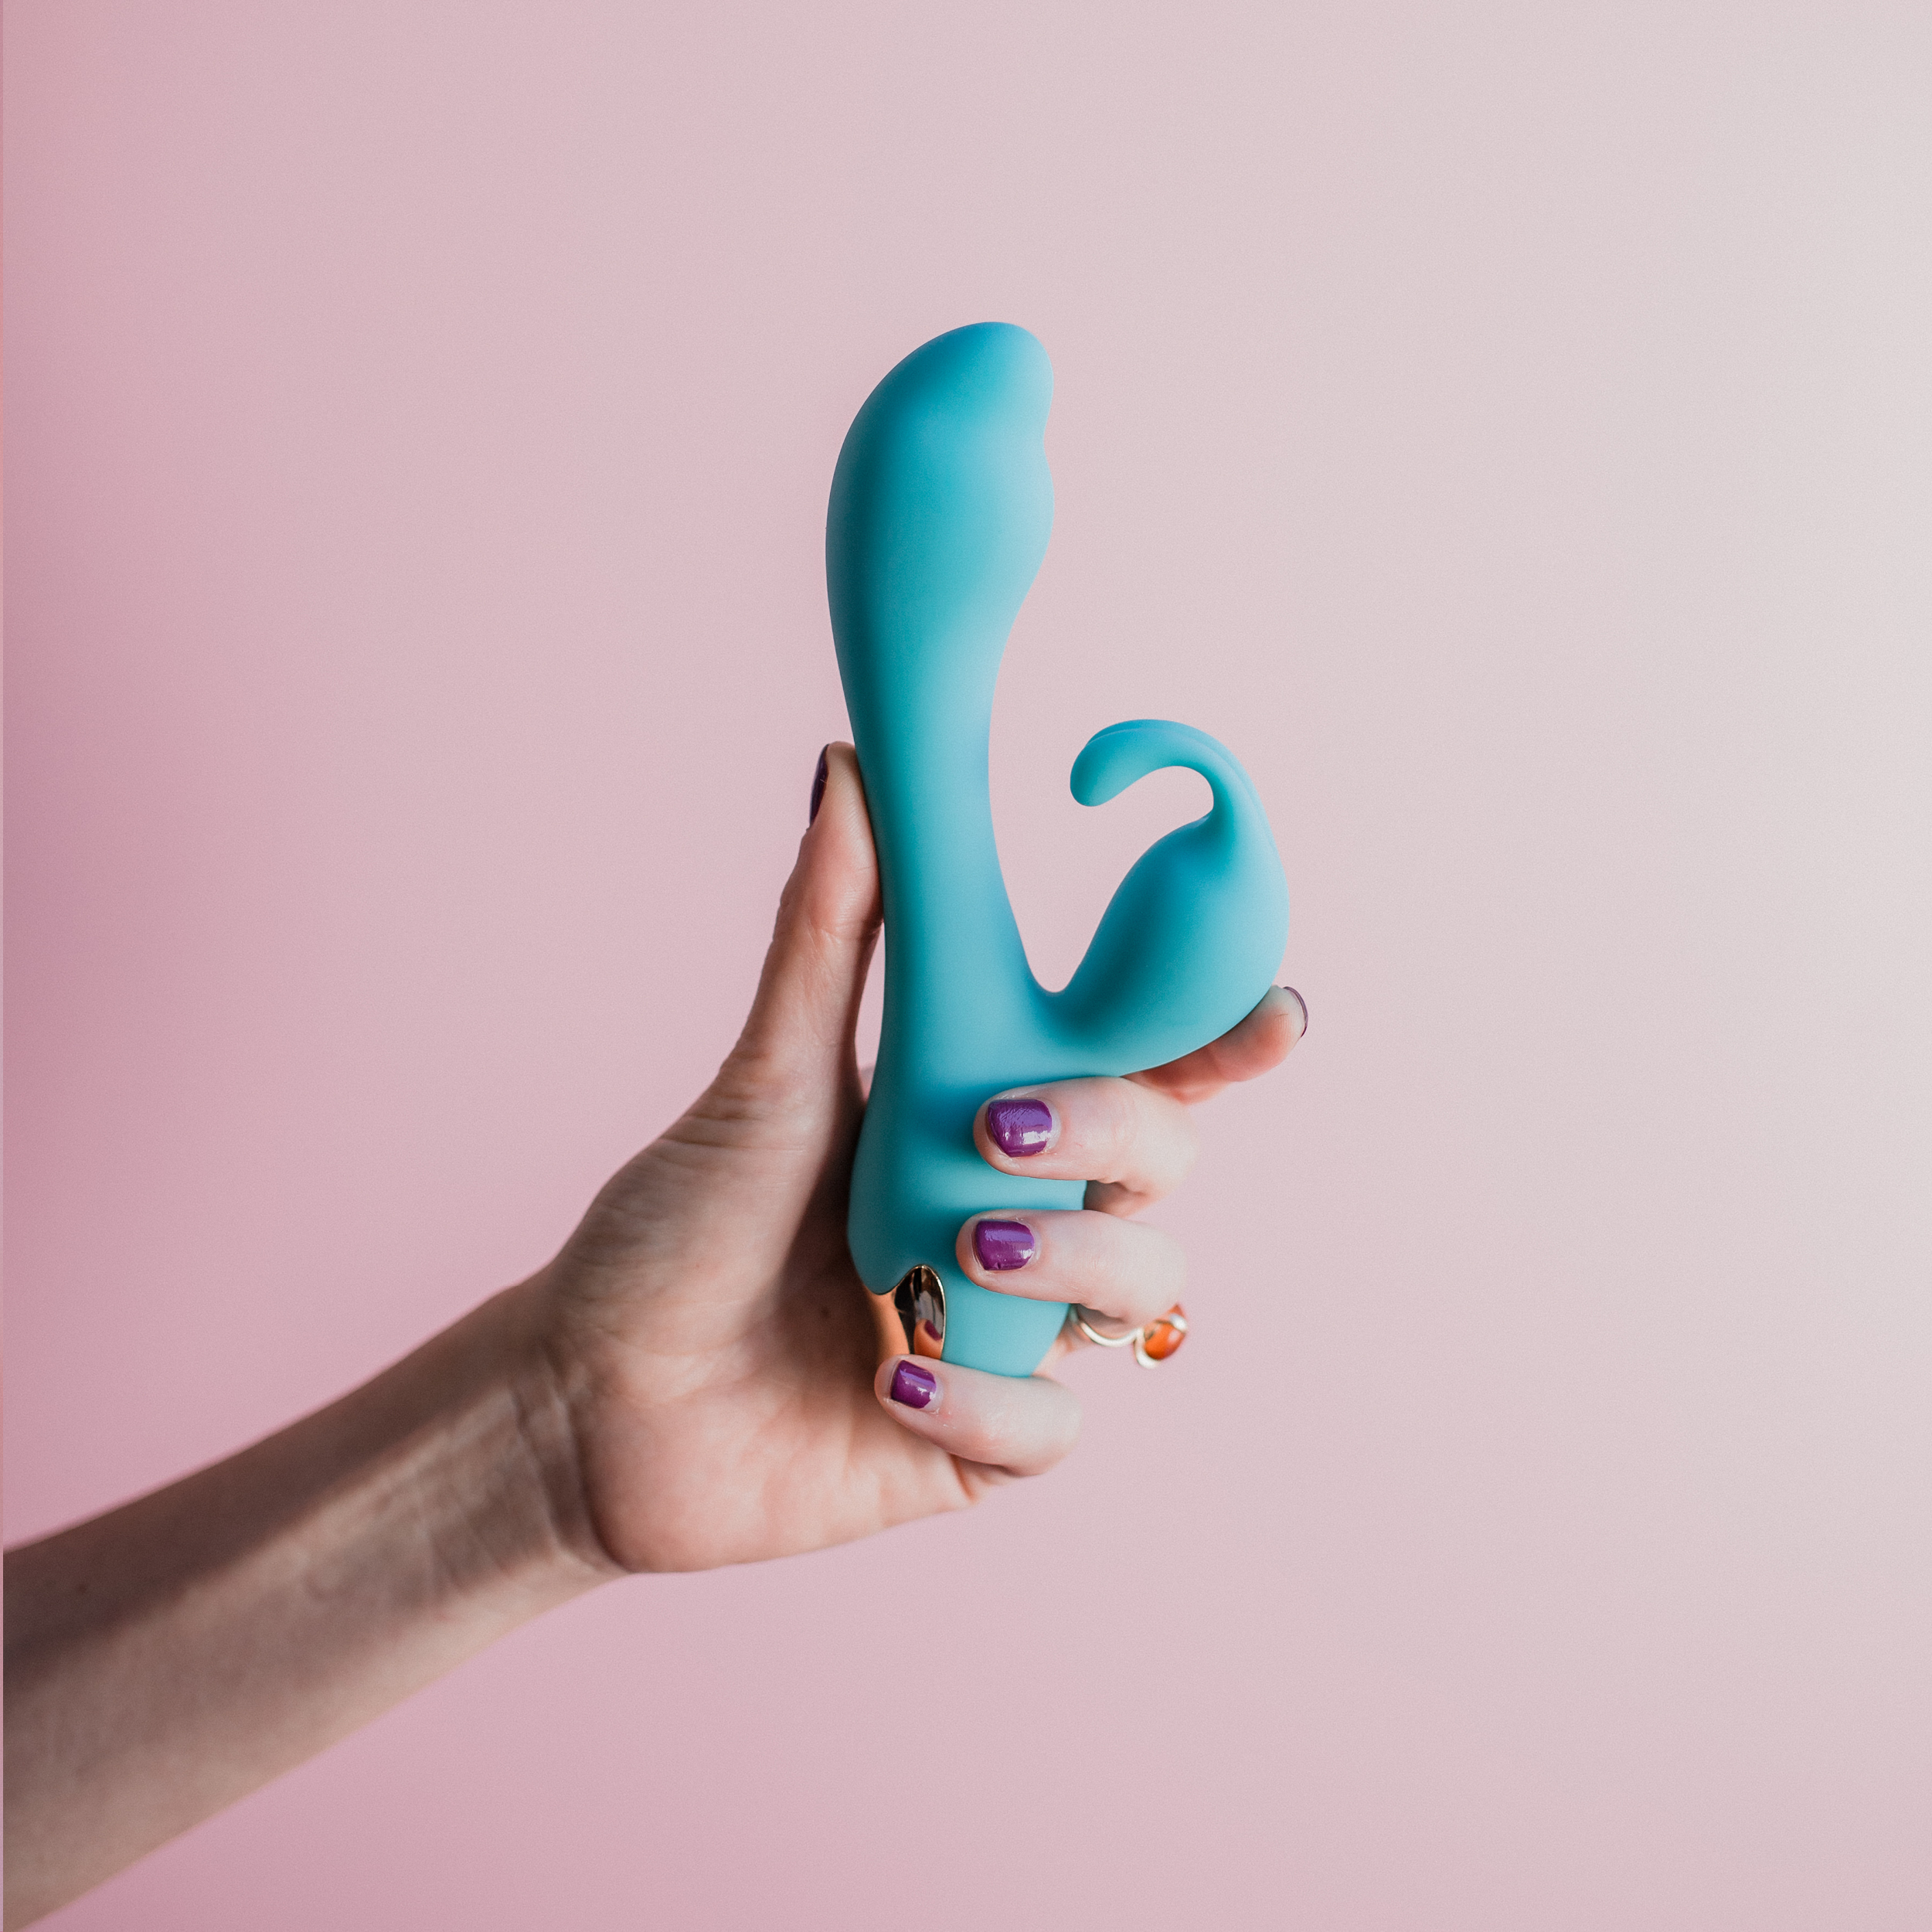 Advantages To Using A Vibrator For Women